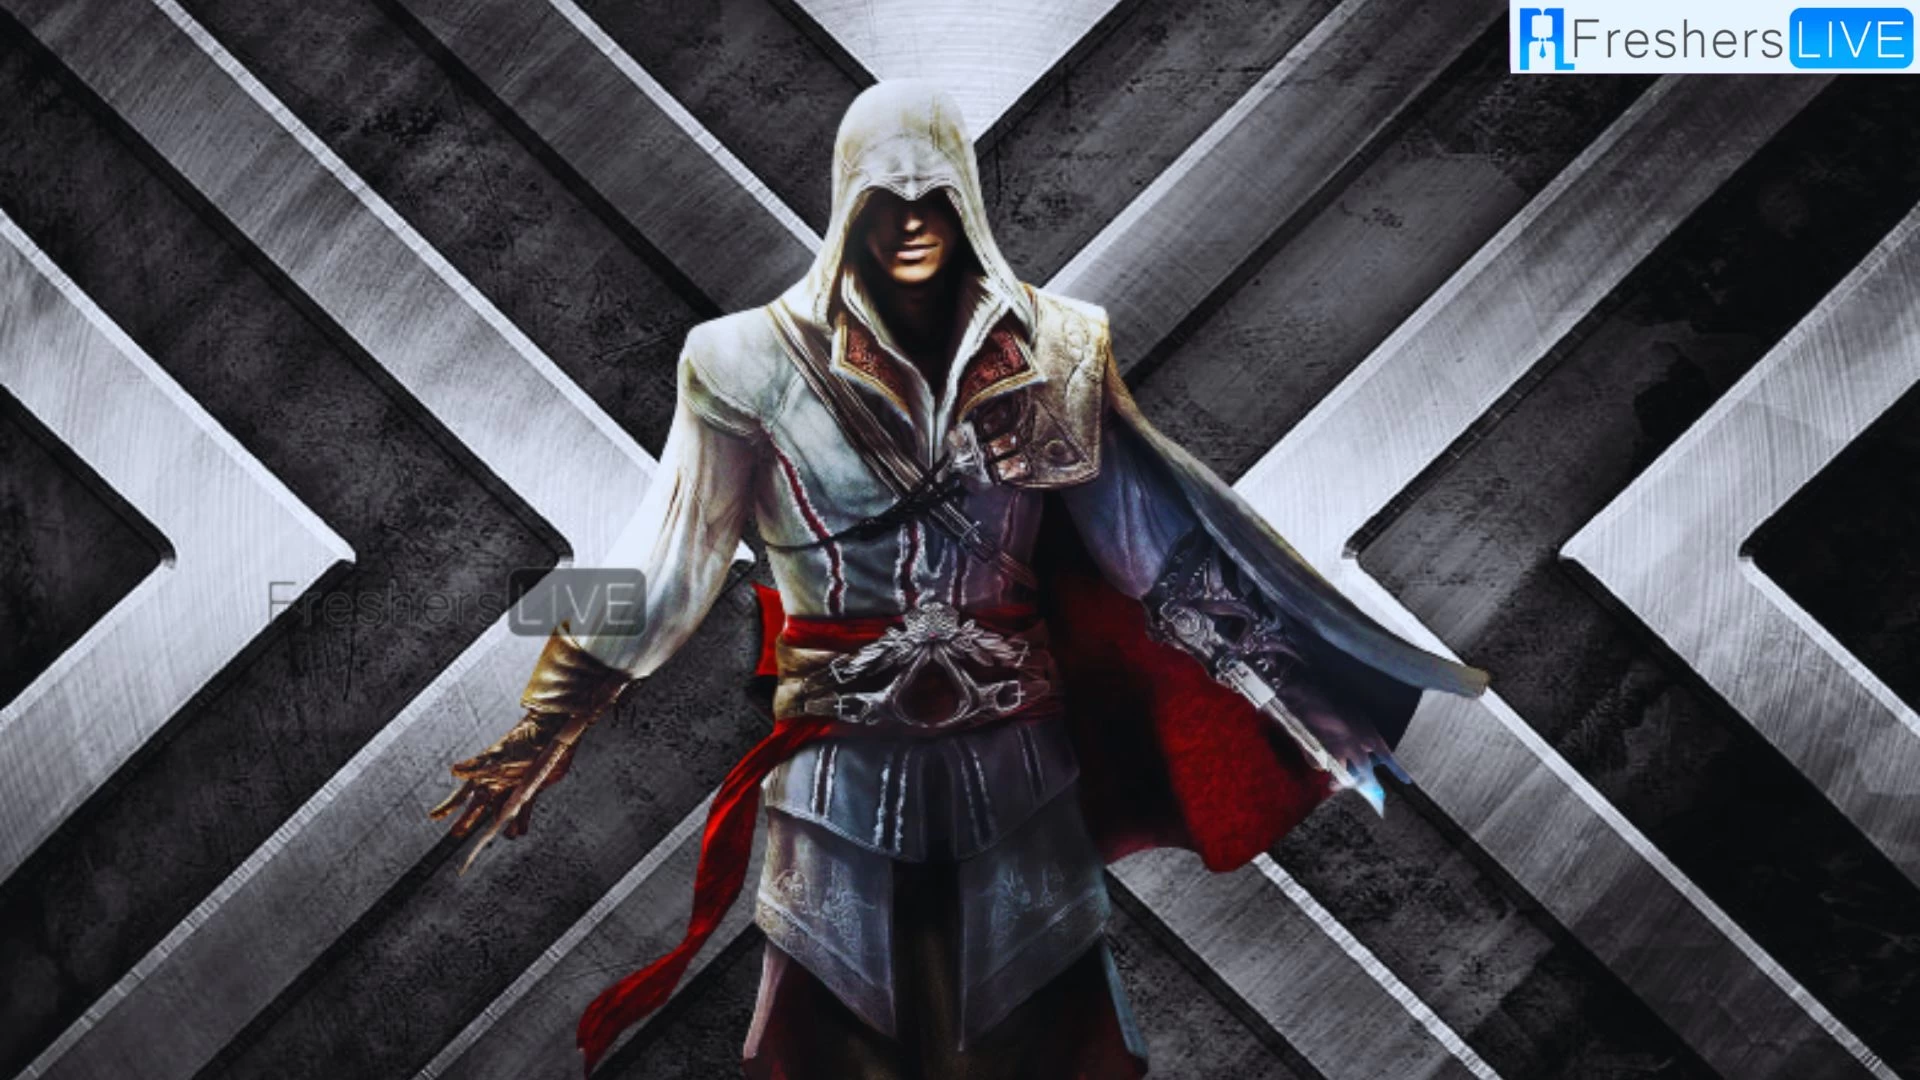 Assassins Creed Mirage Price, Assassins Creed Wiki, Gameplay, and More